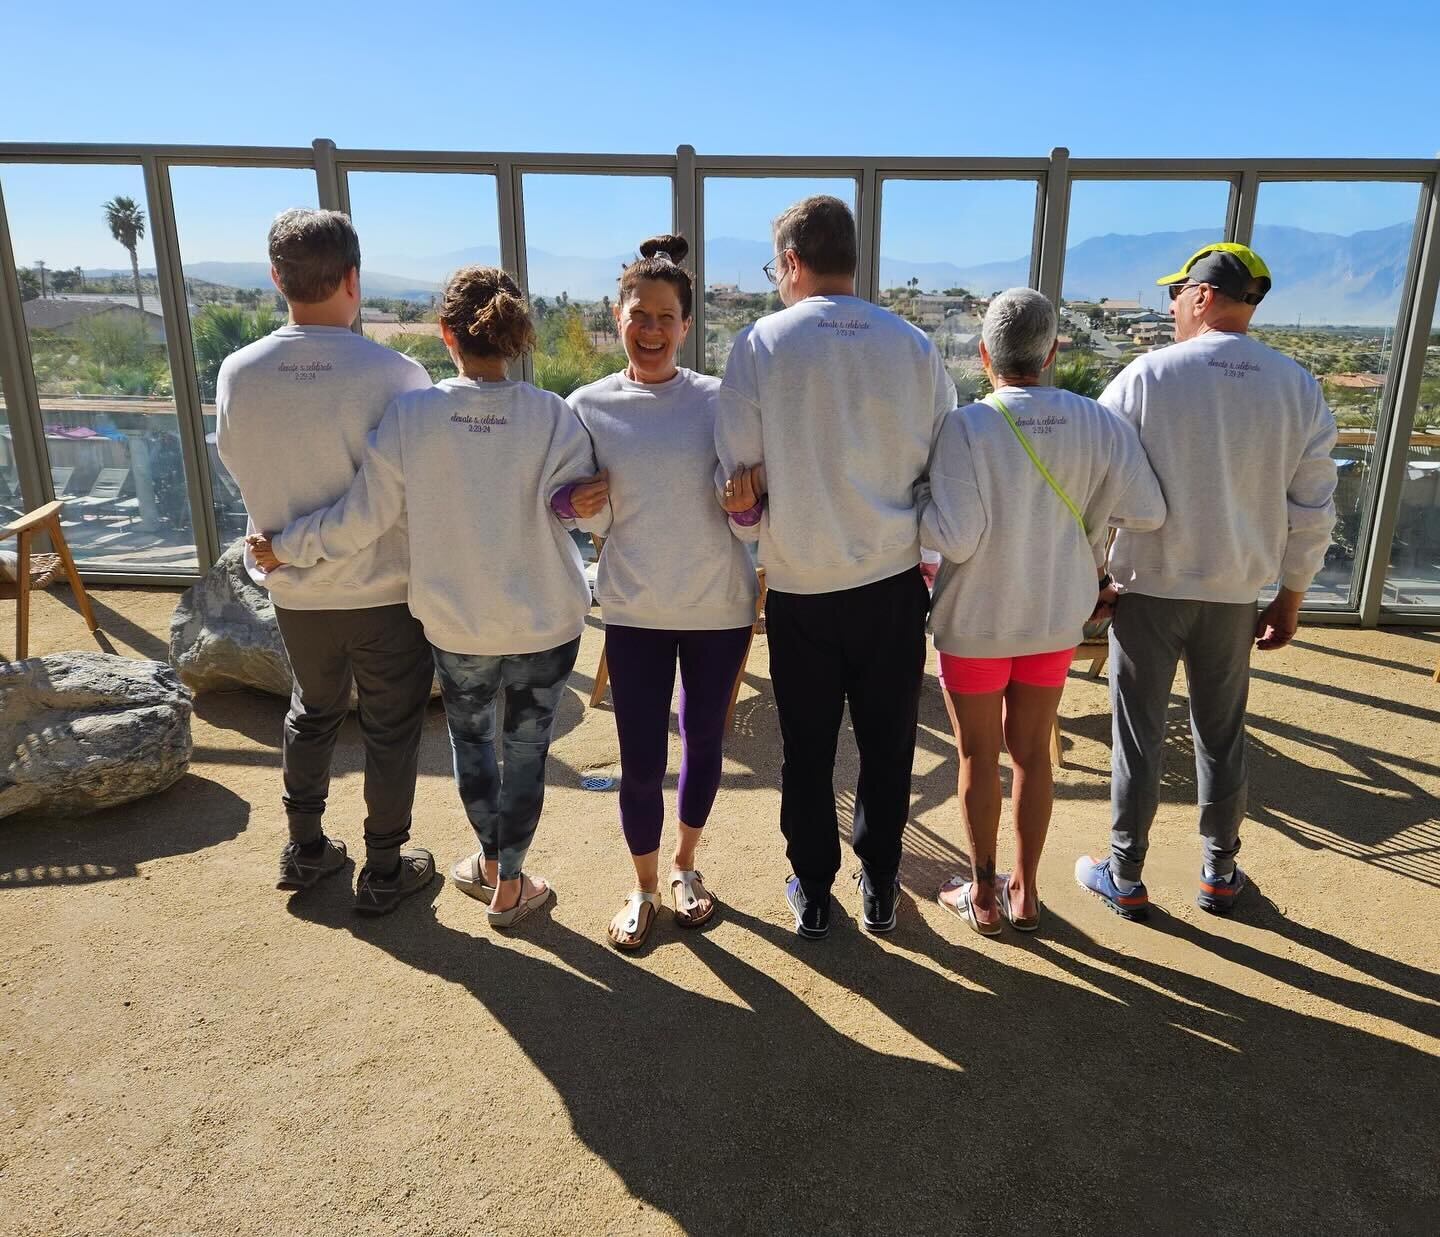 How fabulous is this crew in their matching Irving Place sweatshirts? We created these for a very special birthday celebration in California, with purple thread, of course (the birthday girl&rsquo;s favorite color) 💜🥳